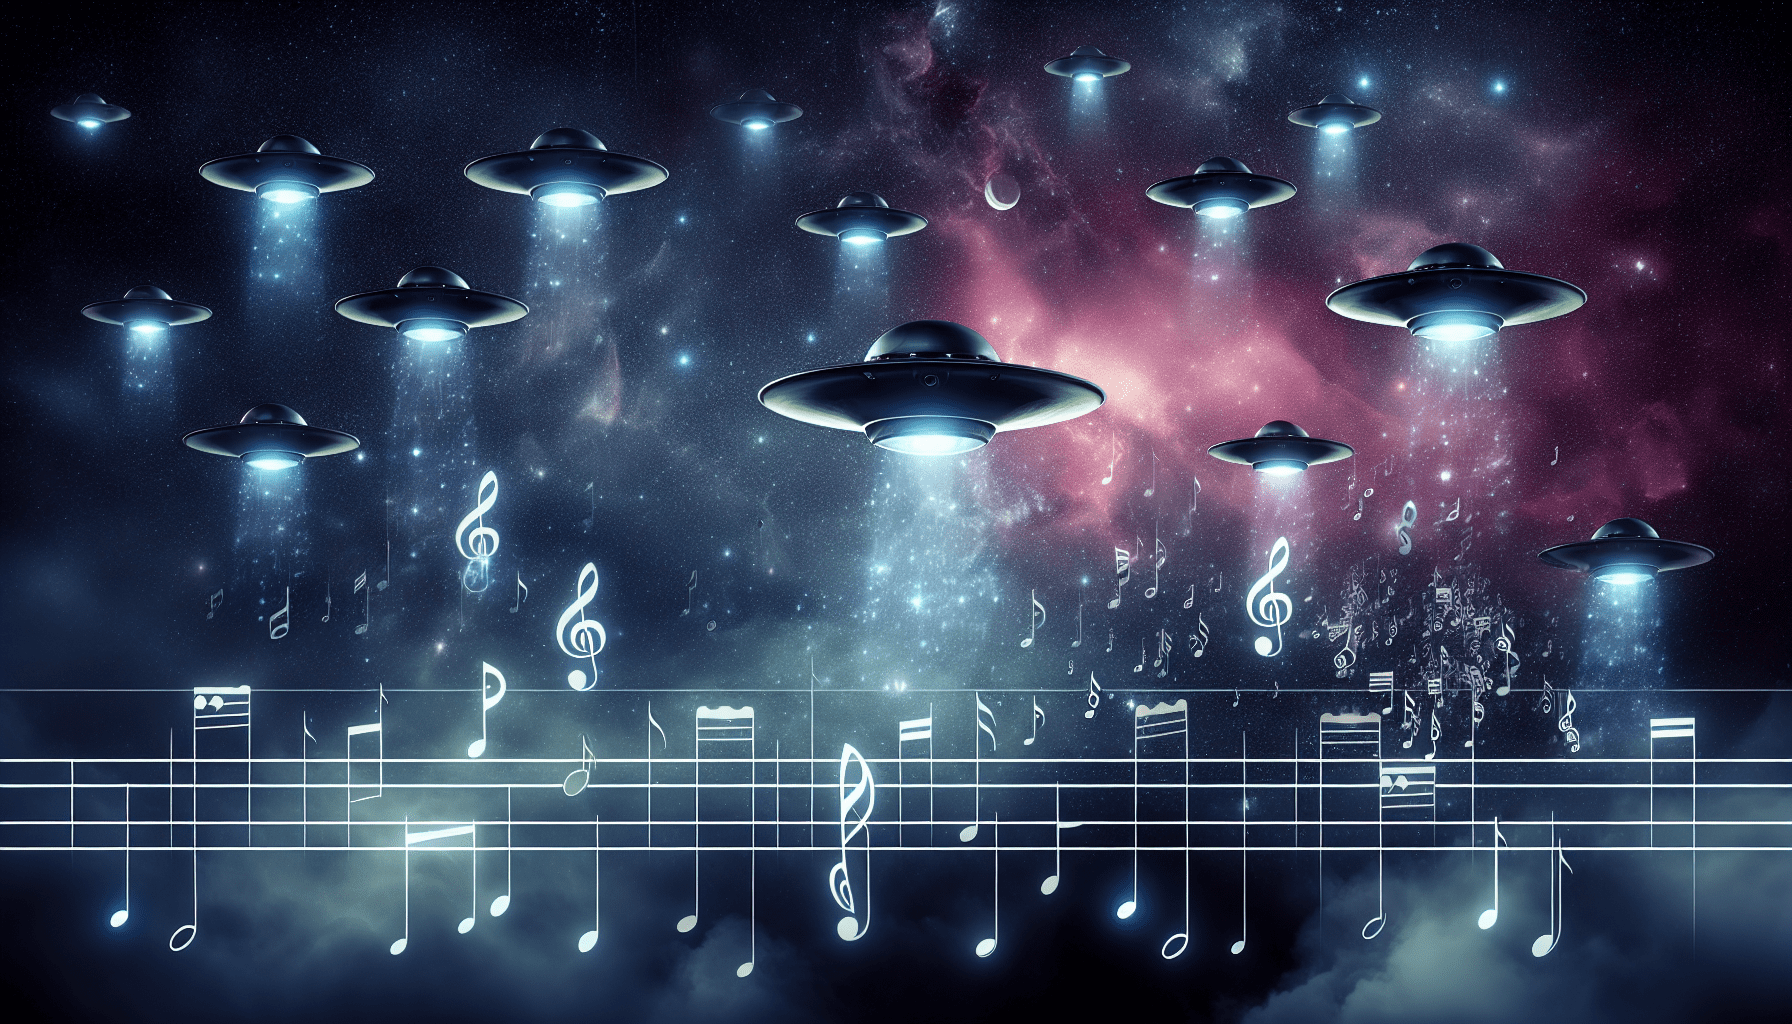 The Role Of Music In UFO Disclosure Narratives